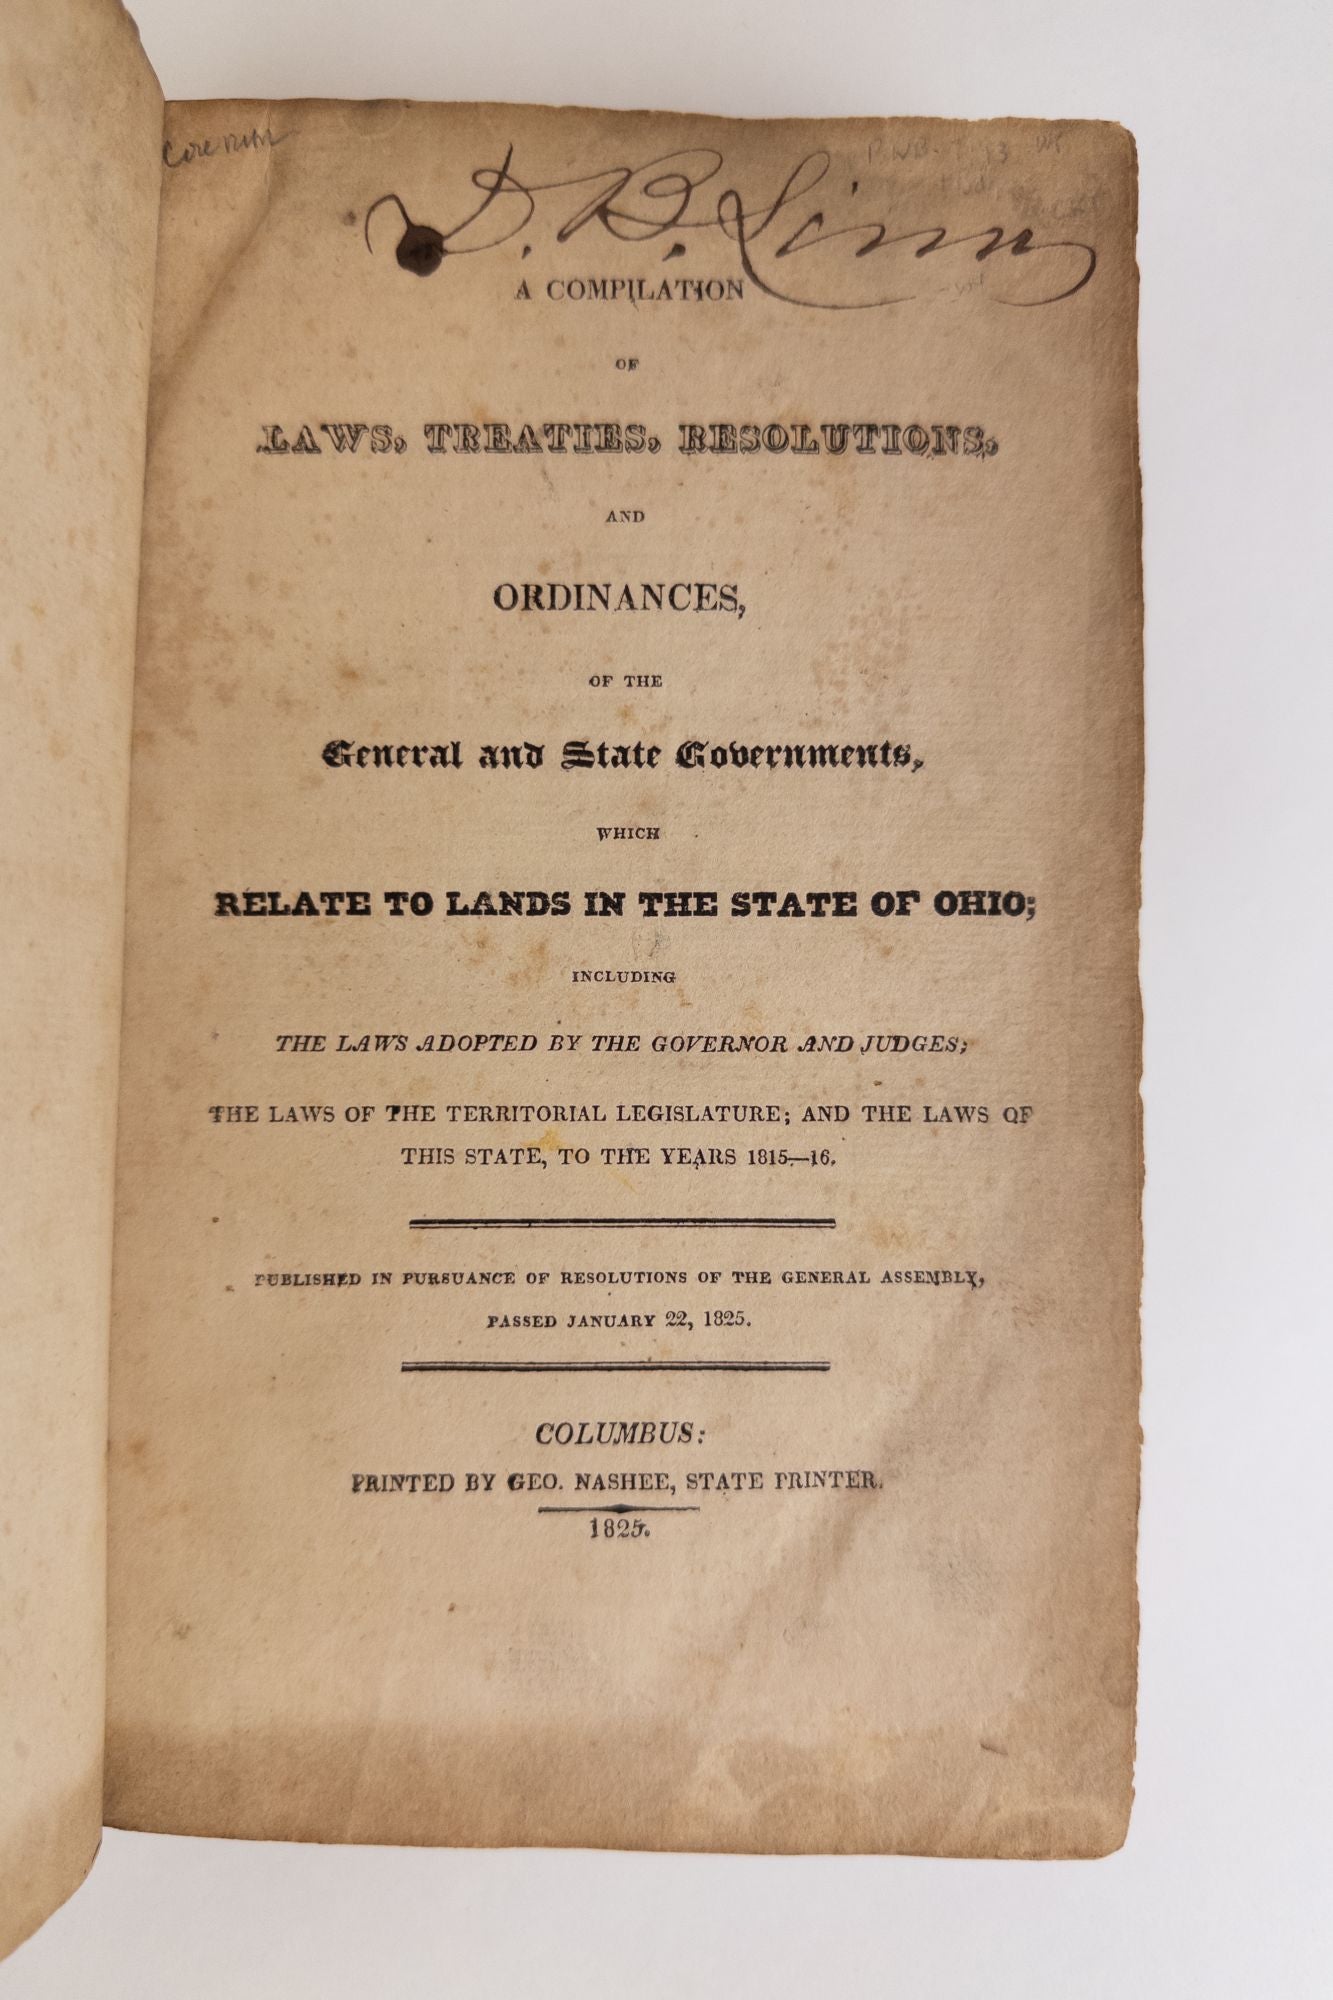 Product Image for A COMPILATION OF LAWS, TREATIES, RESOLUTIONS, AND ORDINANCES, OF THE GENERAL AND STATE GOVERNMENTS, WHICH RELATE TO LANDS IN THE STATE OF OHIO